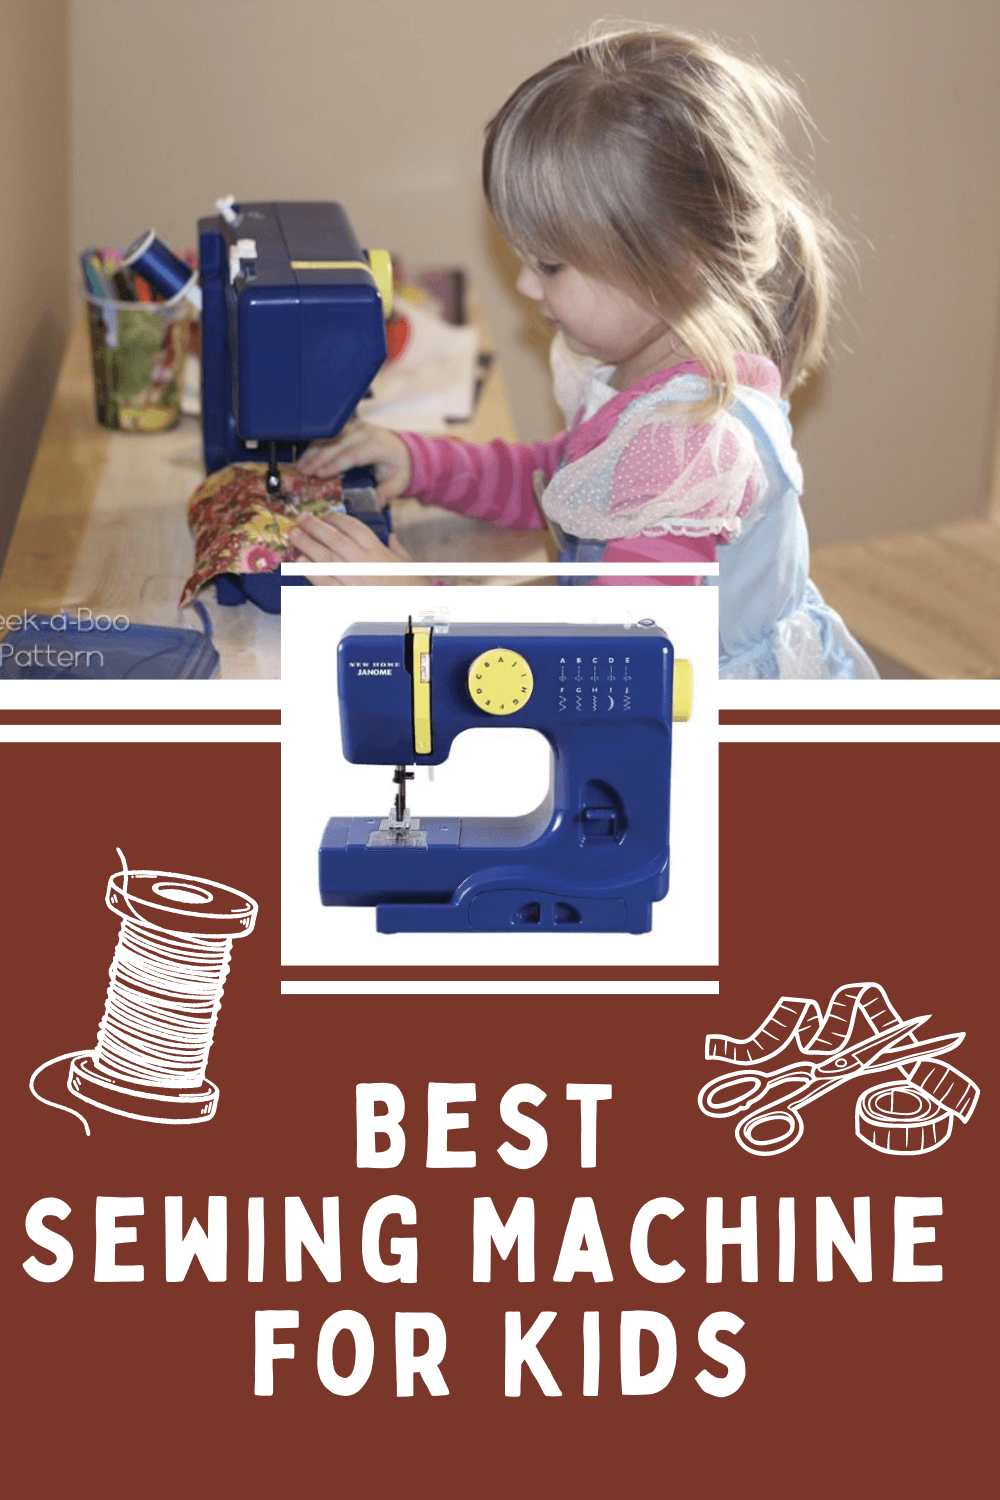 Top 6 Best Sewing Machine for Kids